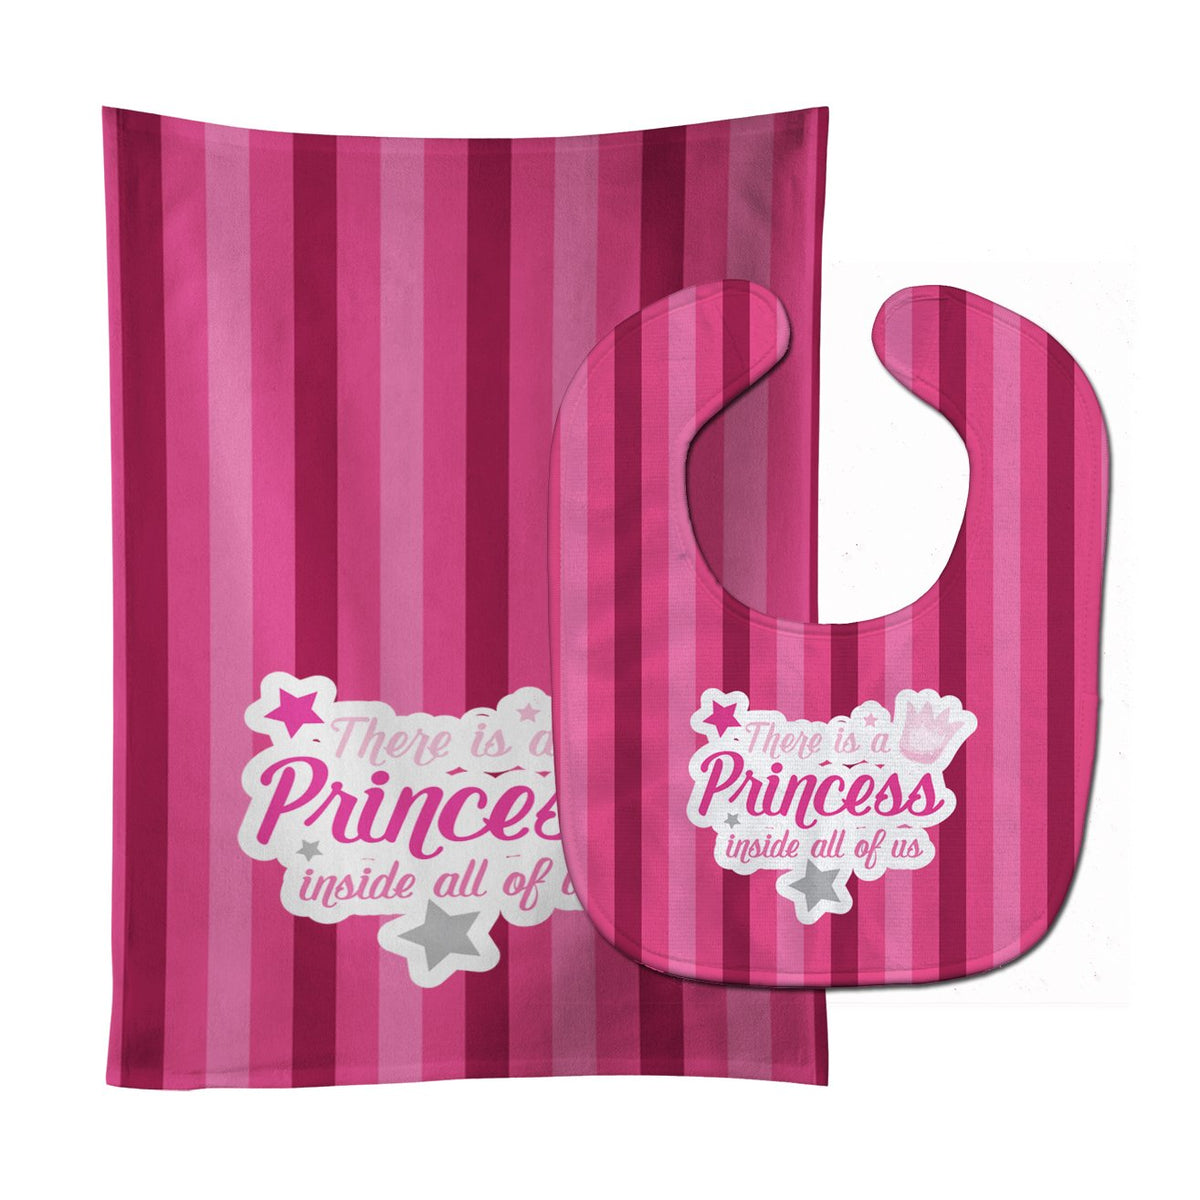 There is a Princess iside all of us Baby Bib &amp; Burp Cloth BB9006STBU by Caroline&#39;s Treasures